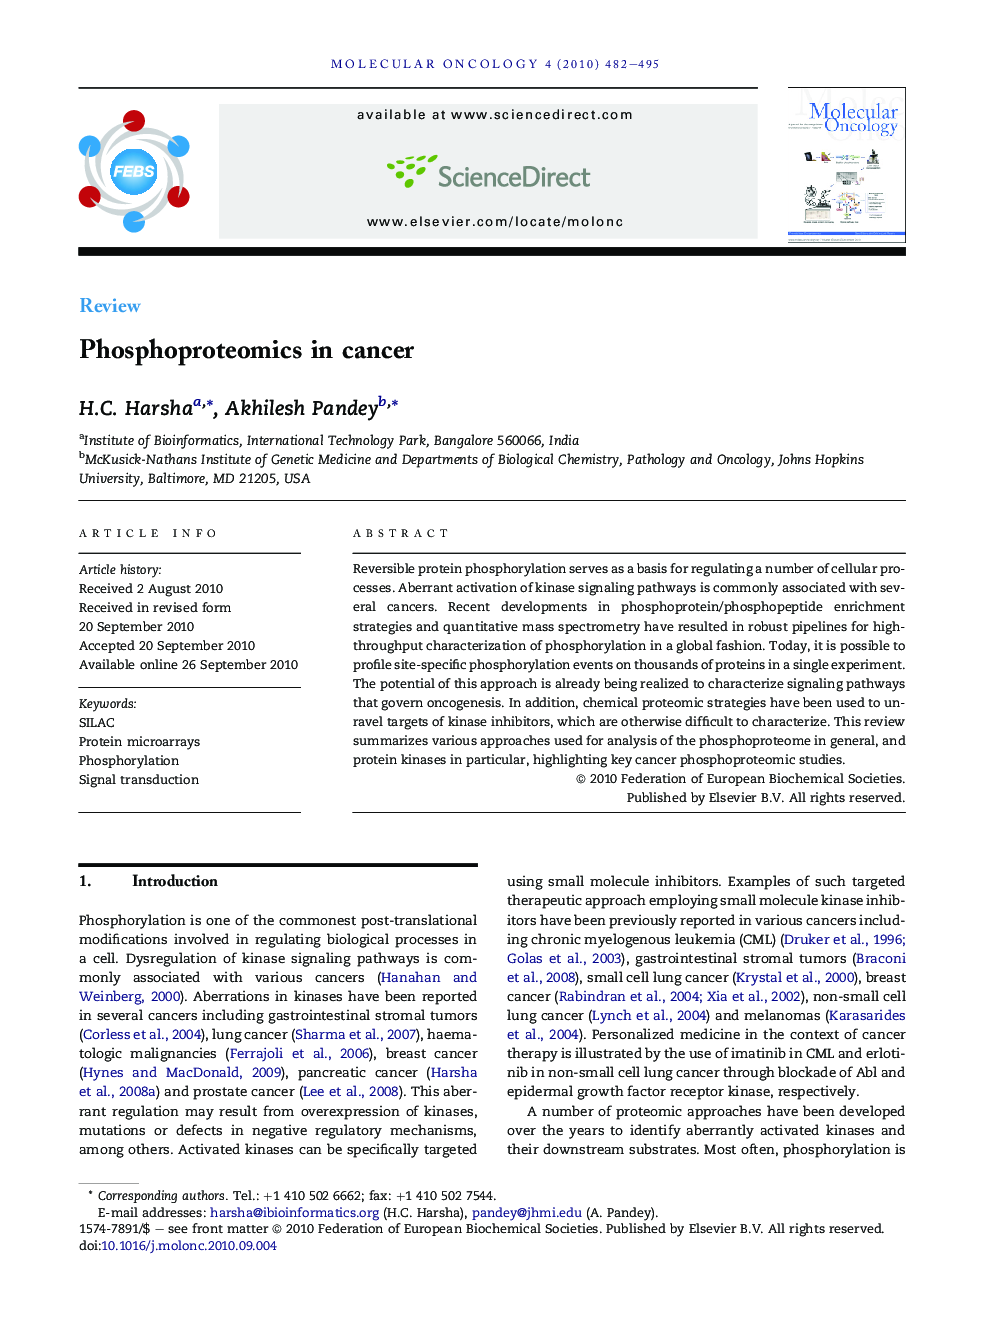 Phosphoproteomics in cancer